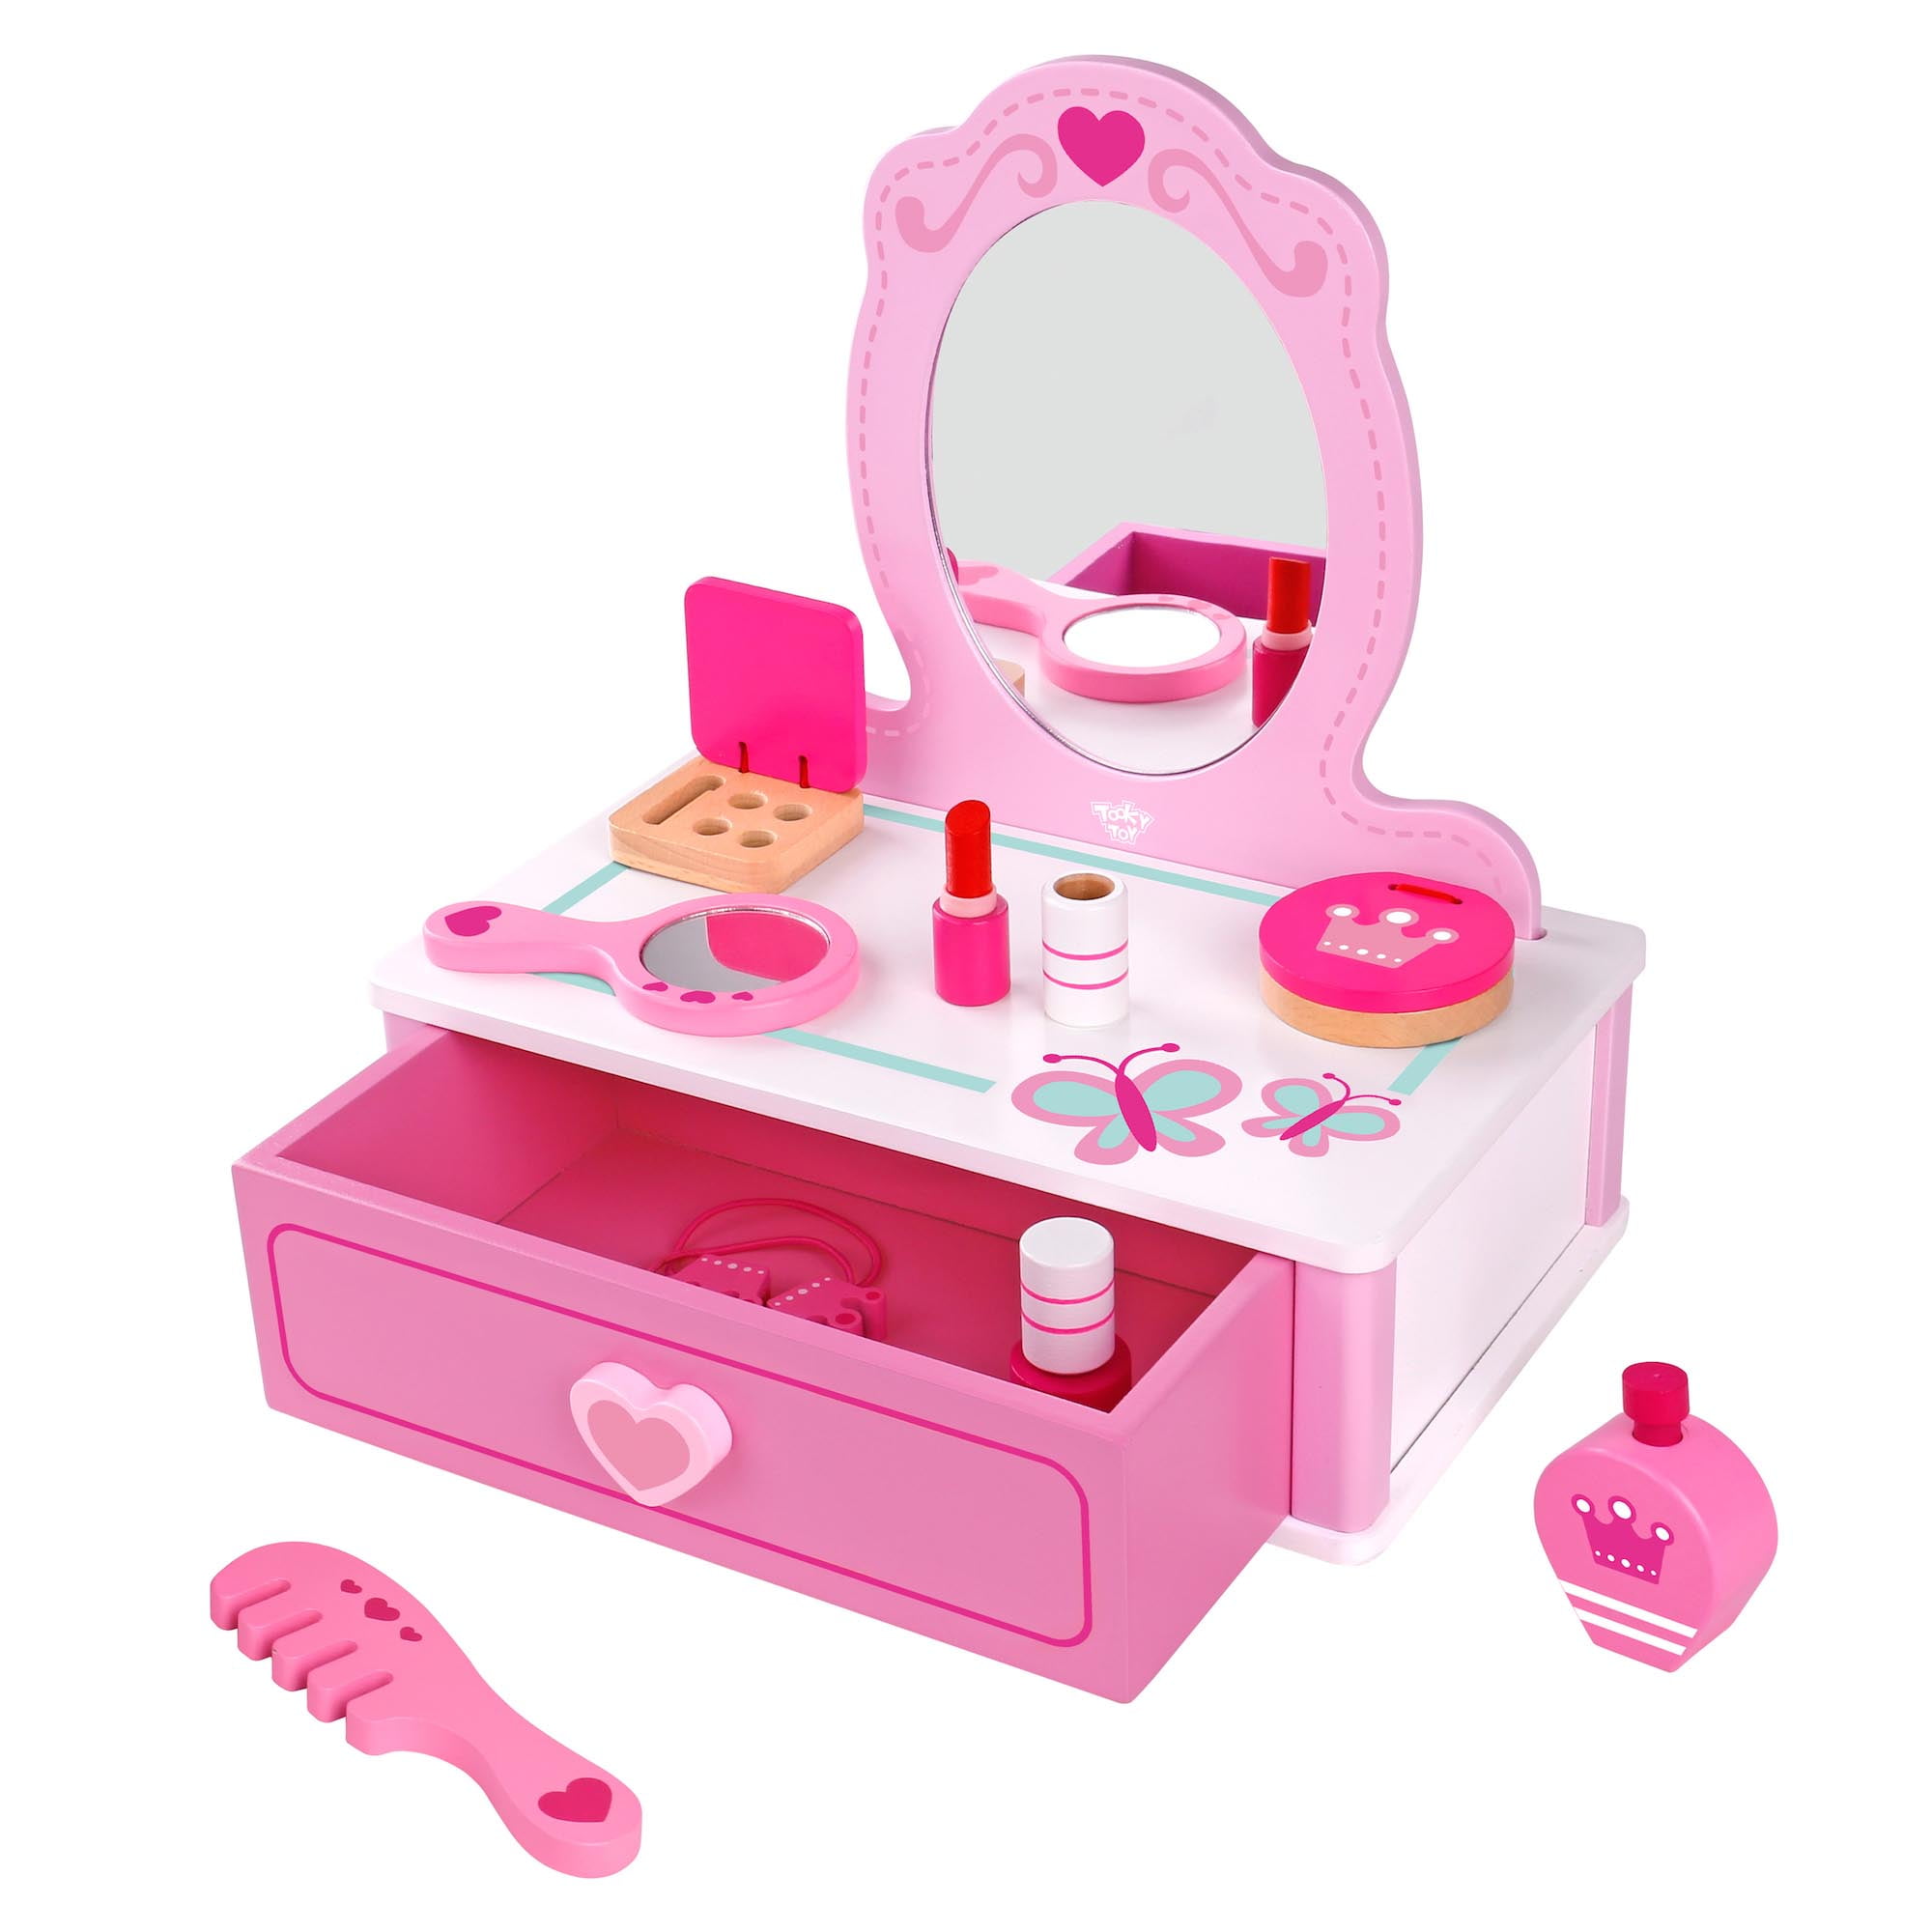 Details about  / Vanity Play Set Girls Pretend Play Makeup Girls Portable Toys Make Up Princess